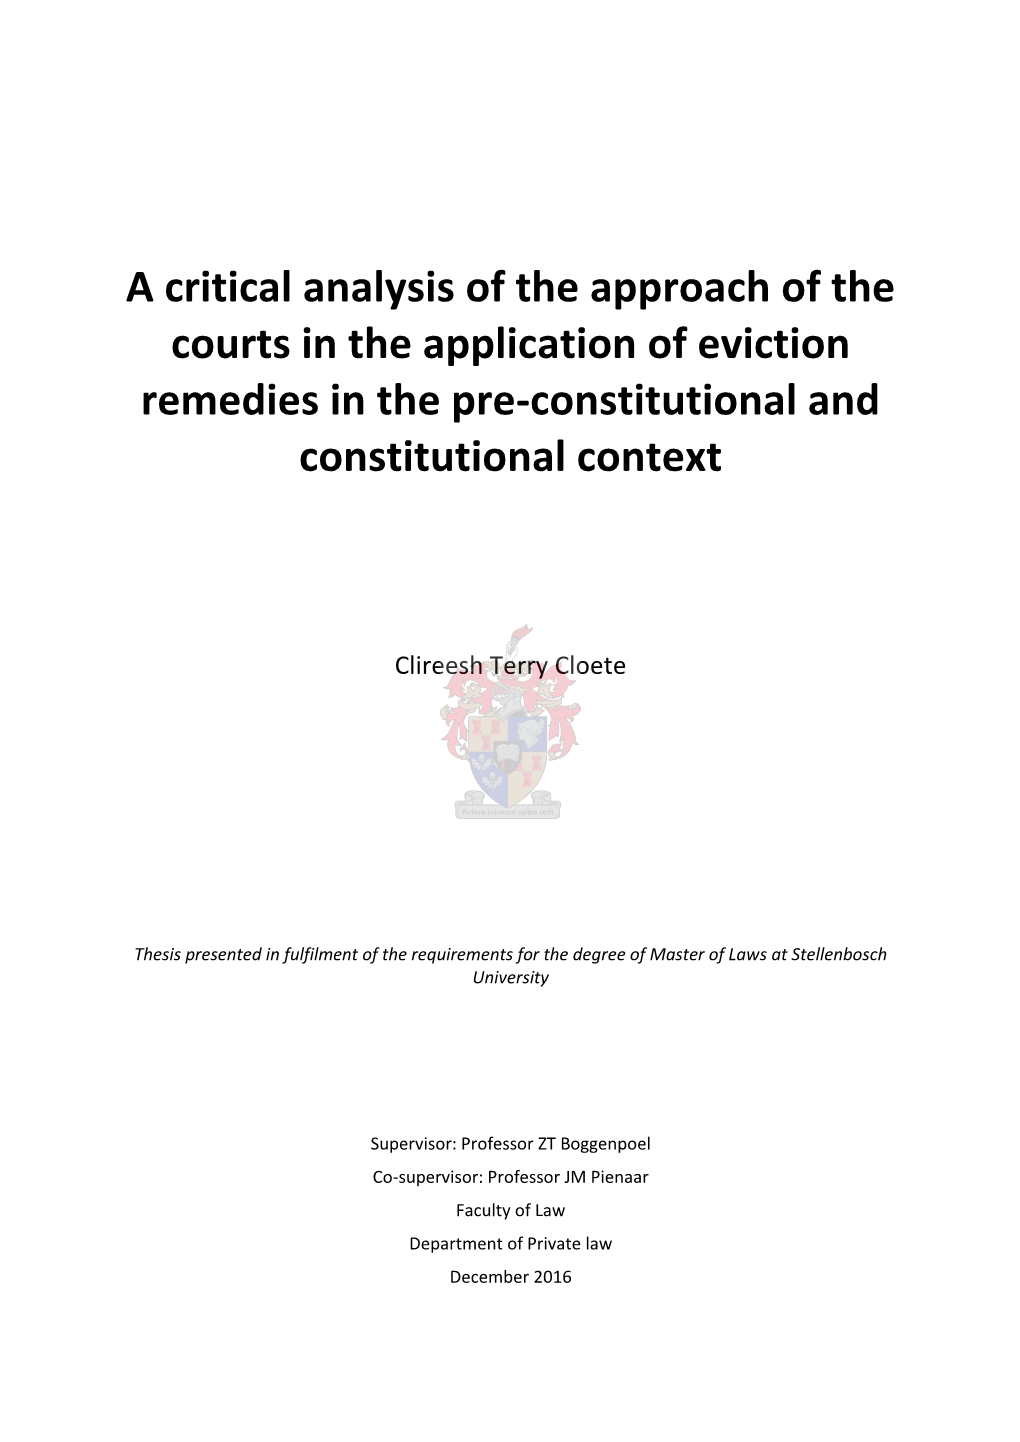 A Critical Analysis of the Approach of the Courts in the Application of Eviction Remedies in the Pre-Constitutional and Constitutional Context